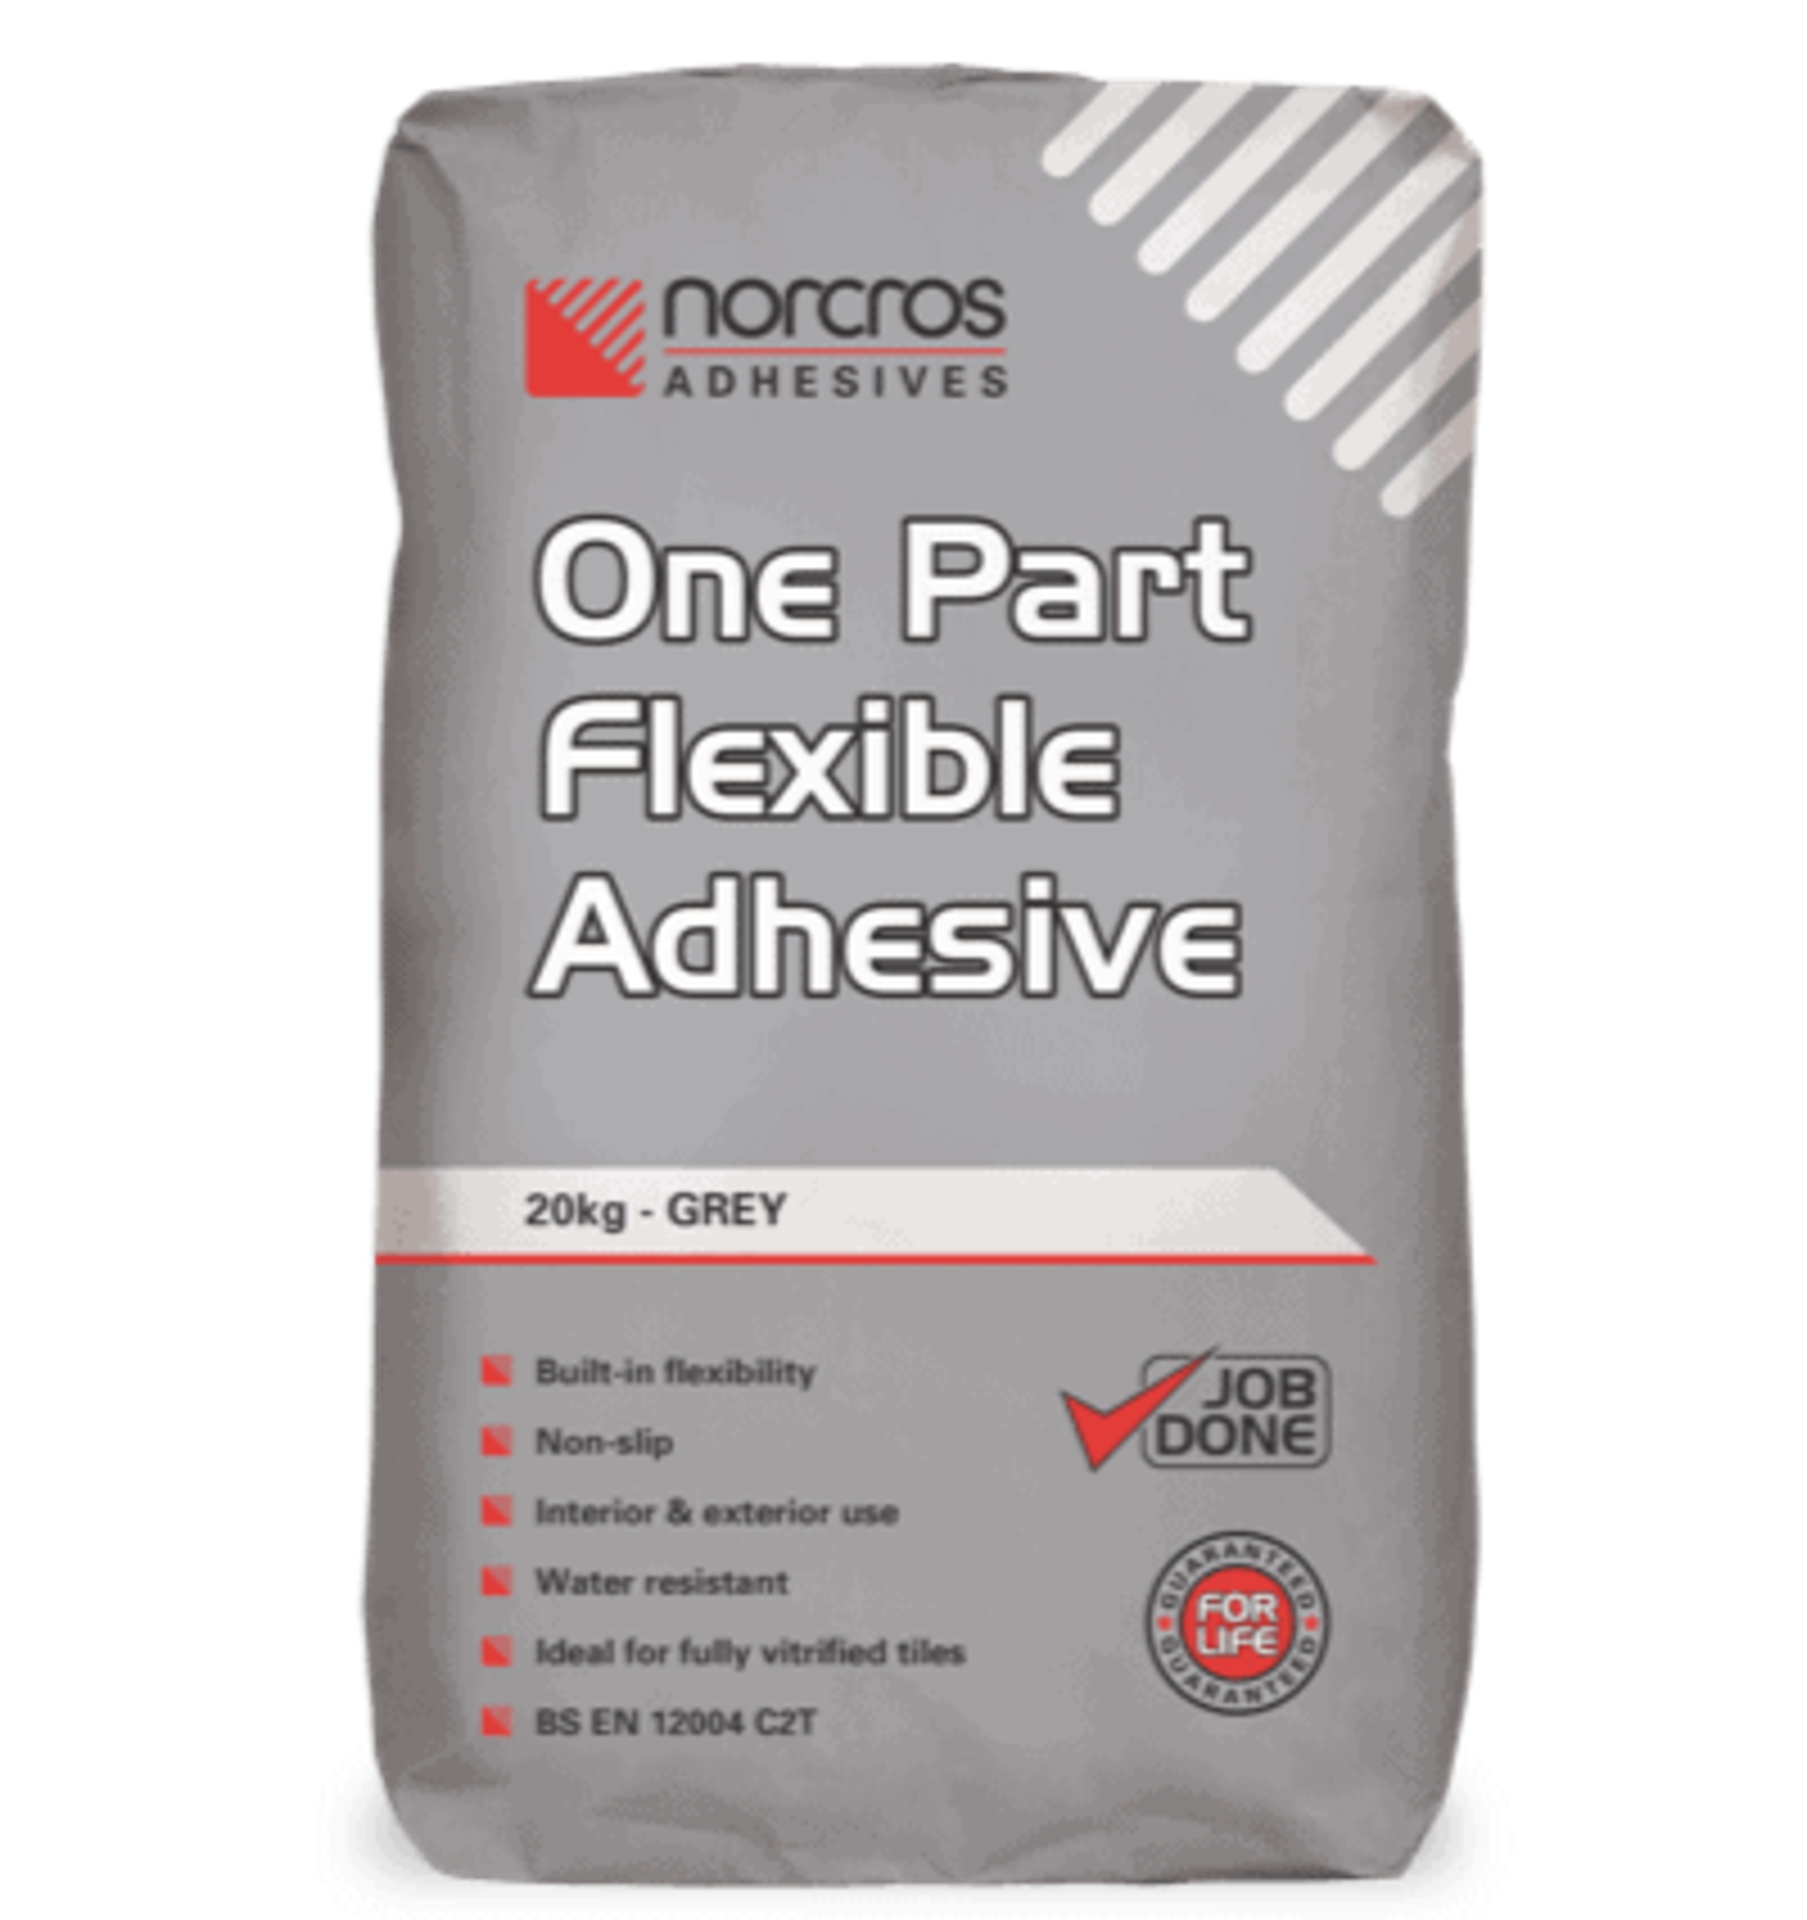 10x BRAND NEW NORCROS ONE PART FLEXIBLE ADHESIVE 20KG GREY R12-9